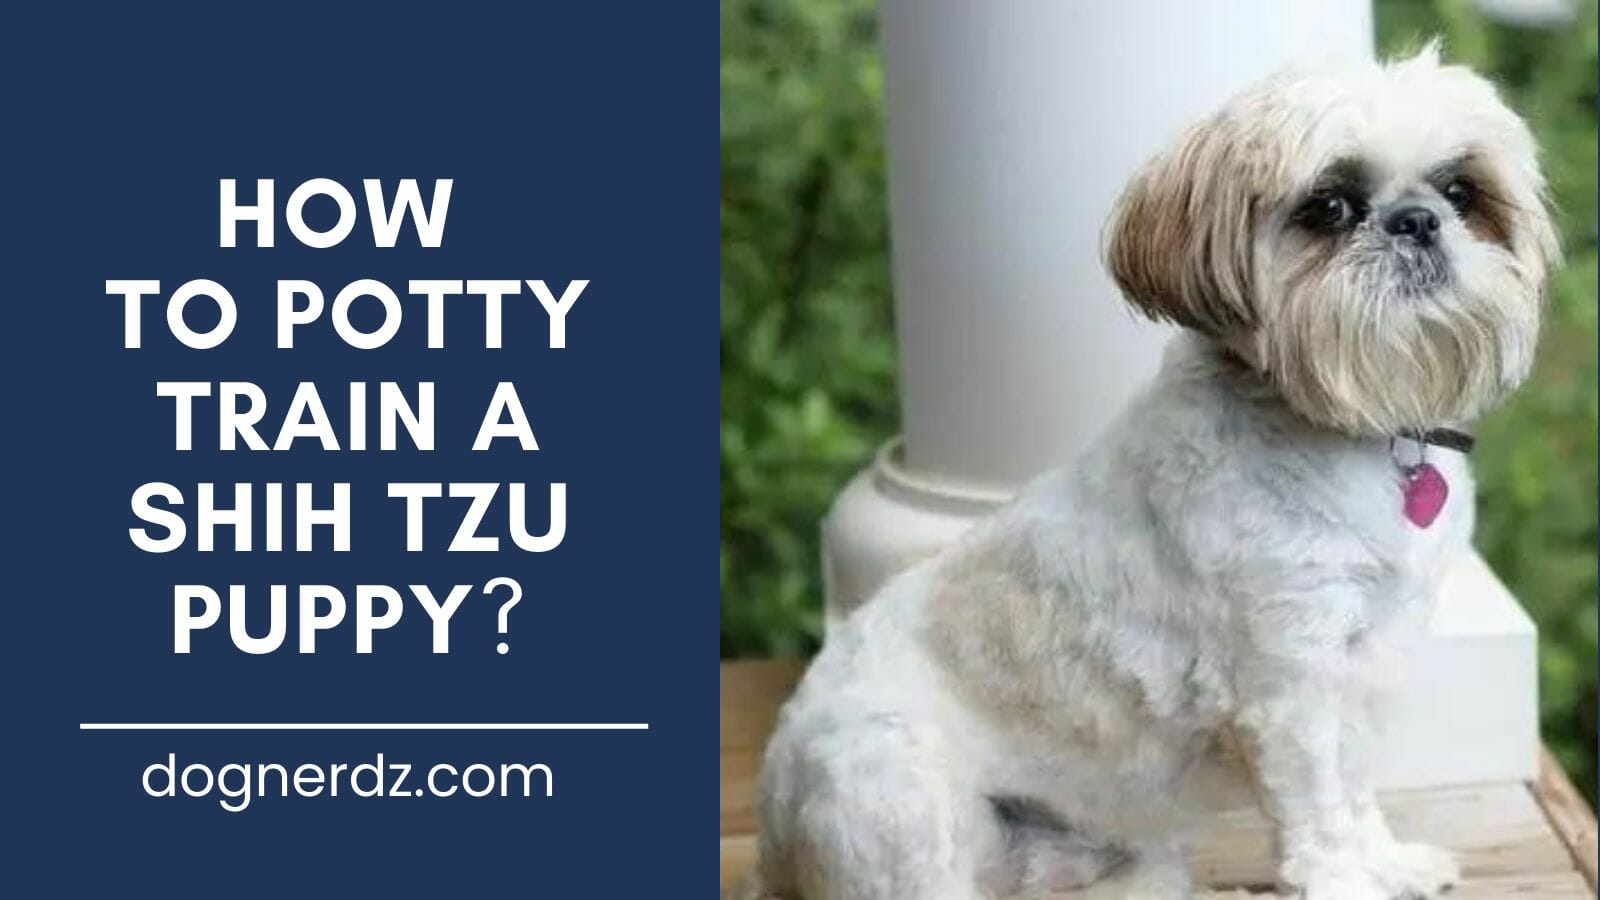 guide for how to potty train a shih tzu puppy